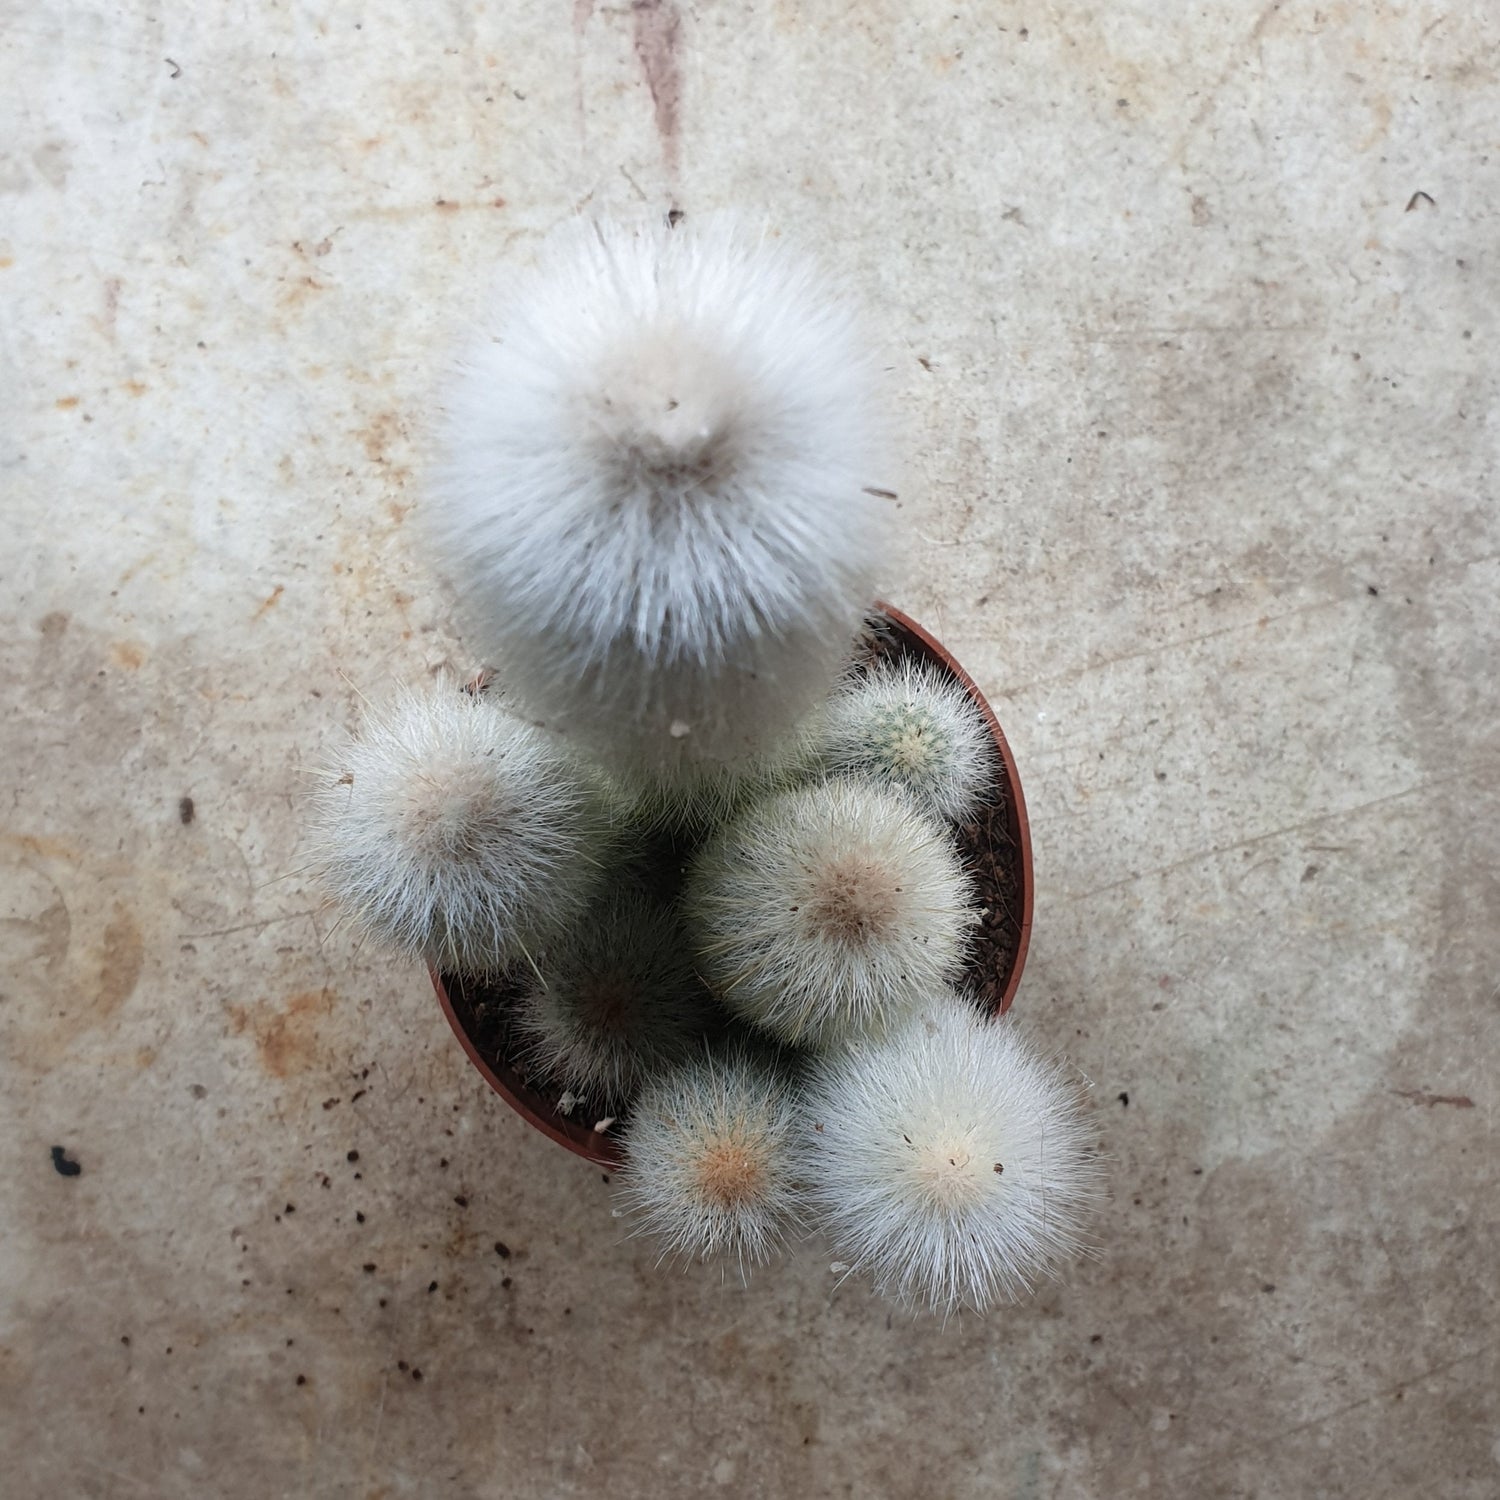 Cleistocactus strausii (Wooly torch/ Silver torch cactus)